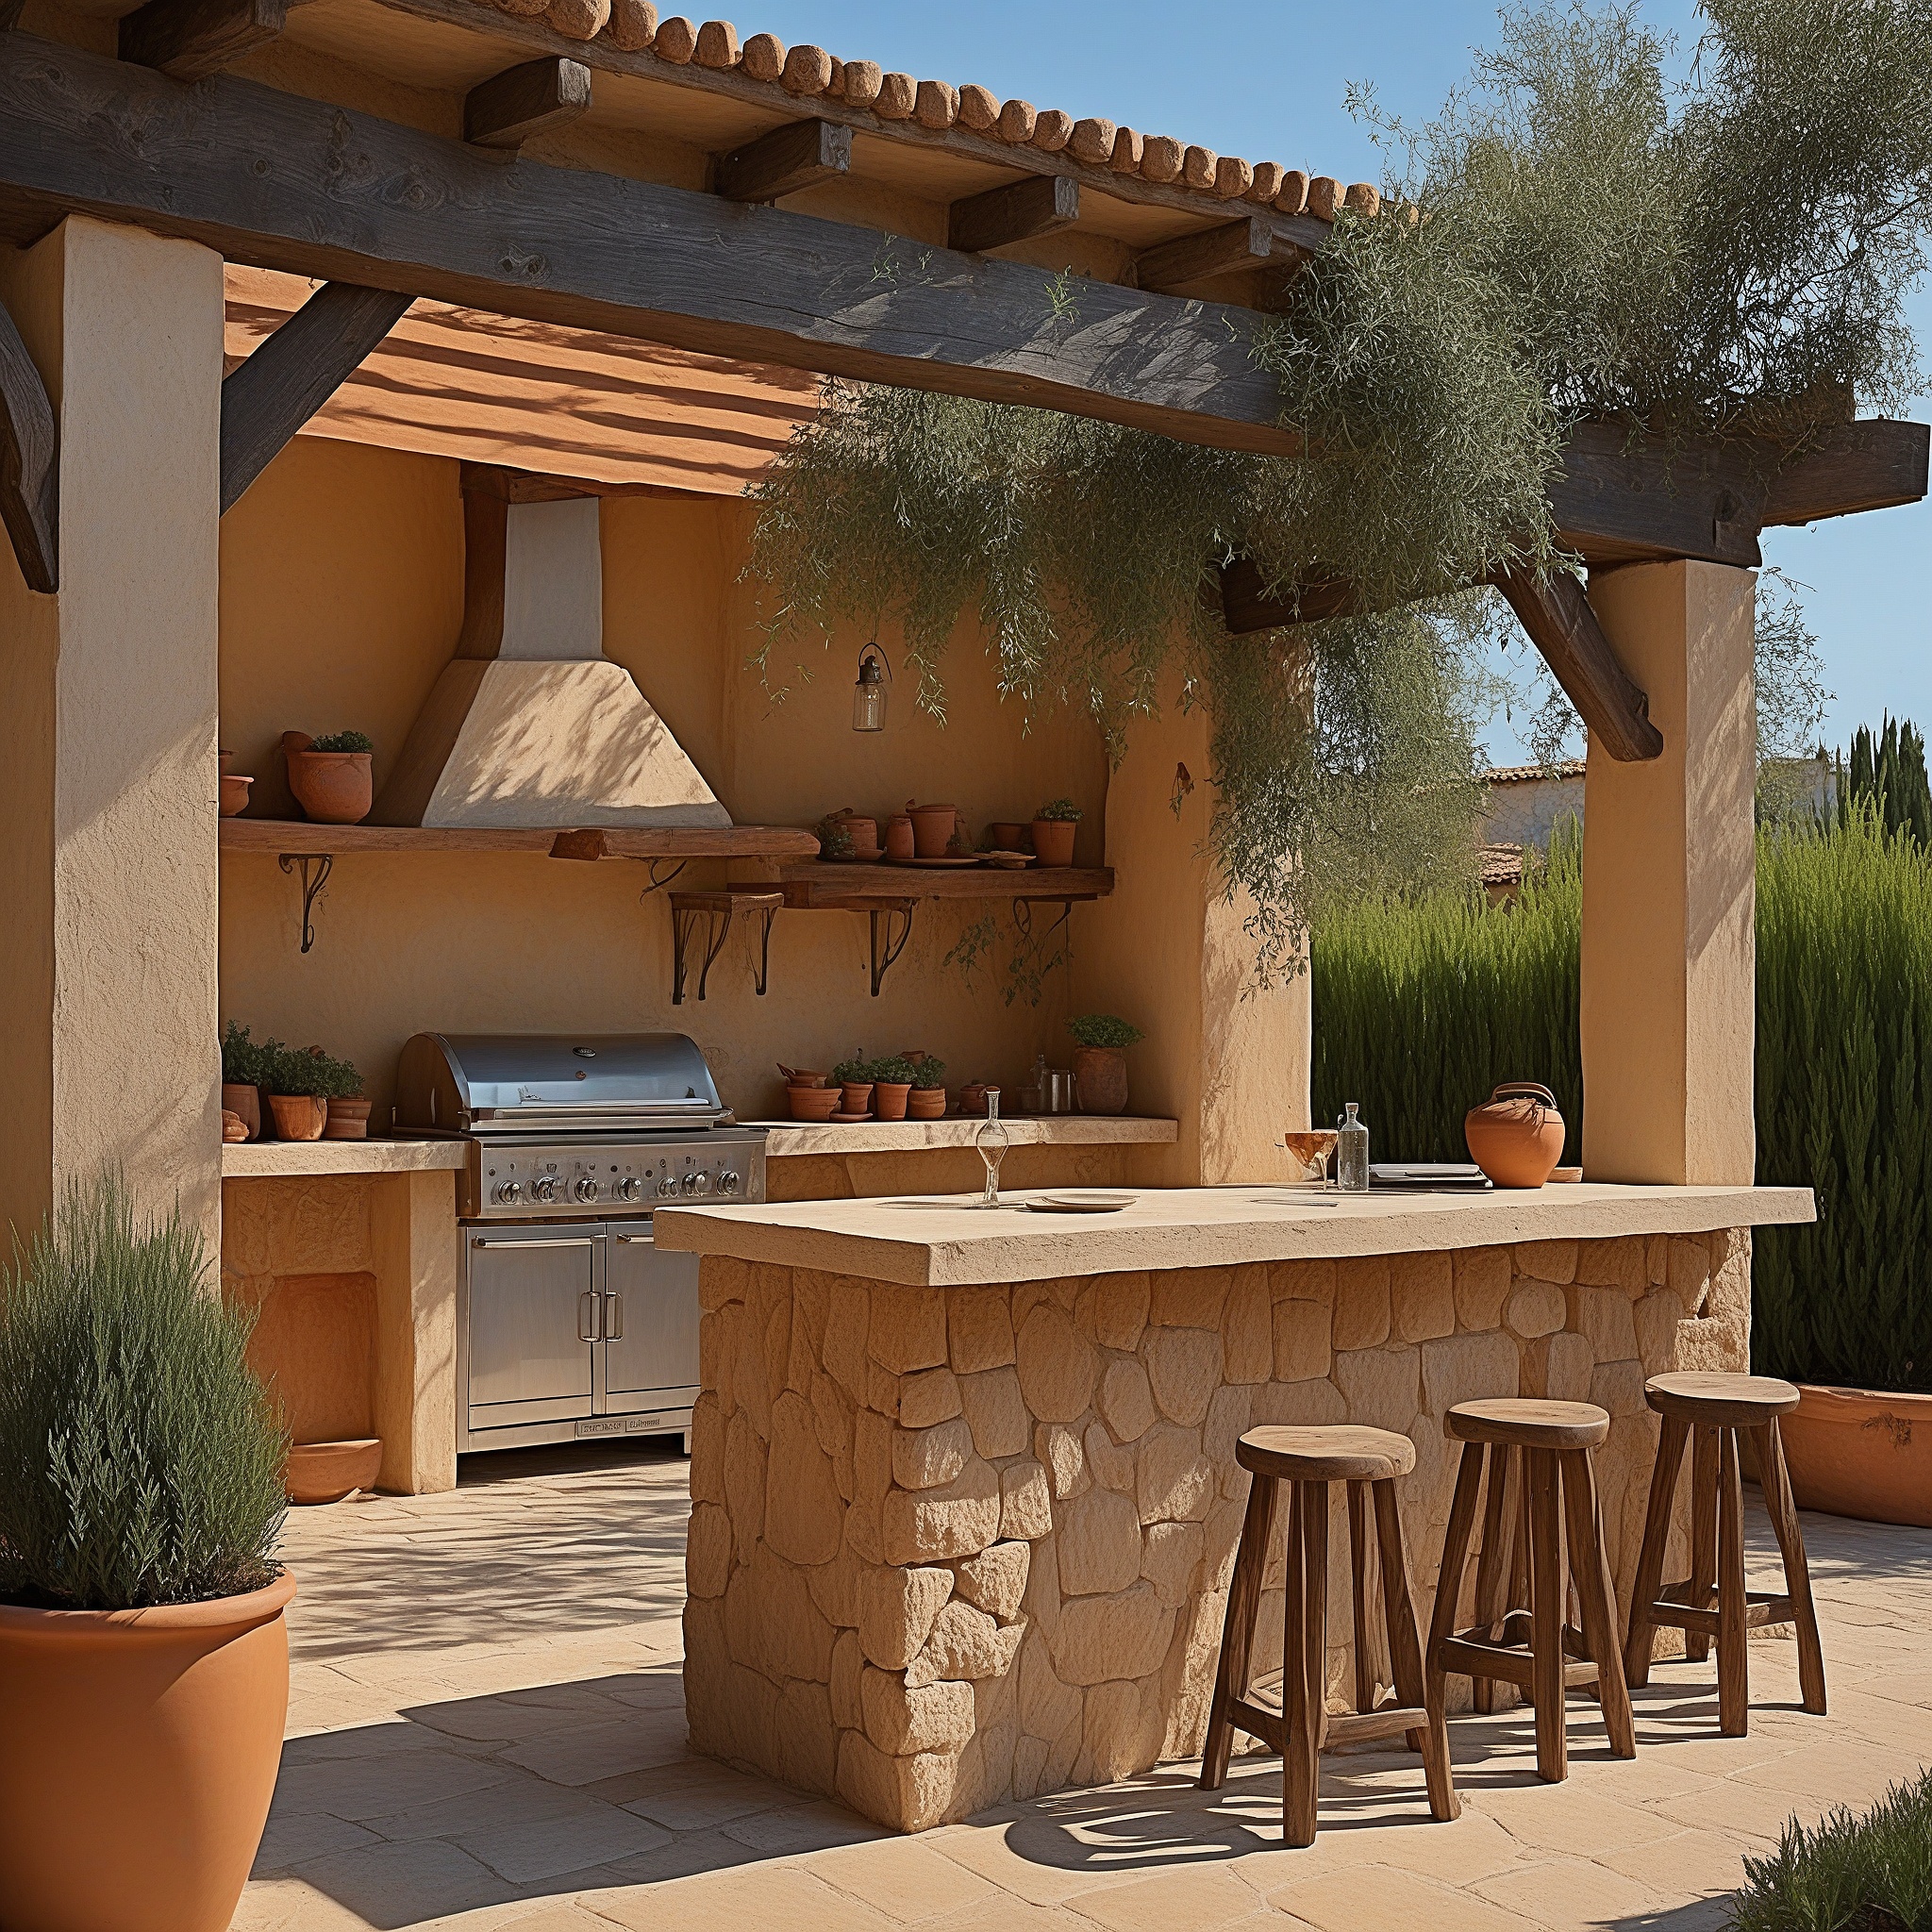 Rustic Stone Bar and Grill Setup in a Mediterranean Garden the Bar Built from Rough-hewn Limestone